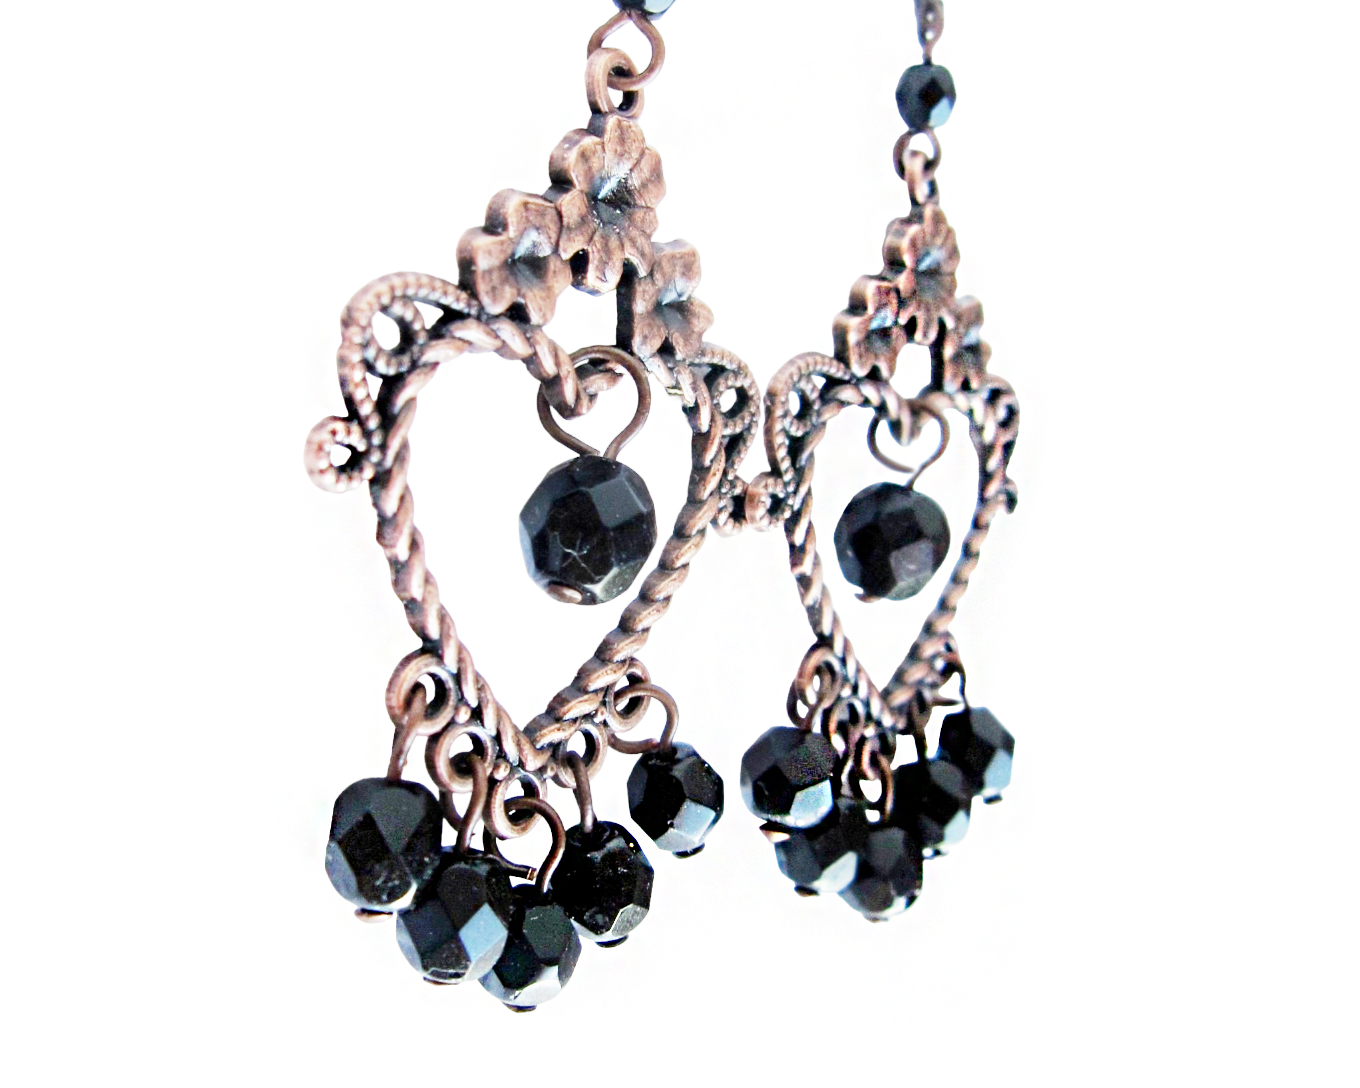 Large Antiqued Copper Heart Chandelier Earrings with Floral Designs and  Black Sparkly crystal dangles. 